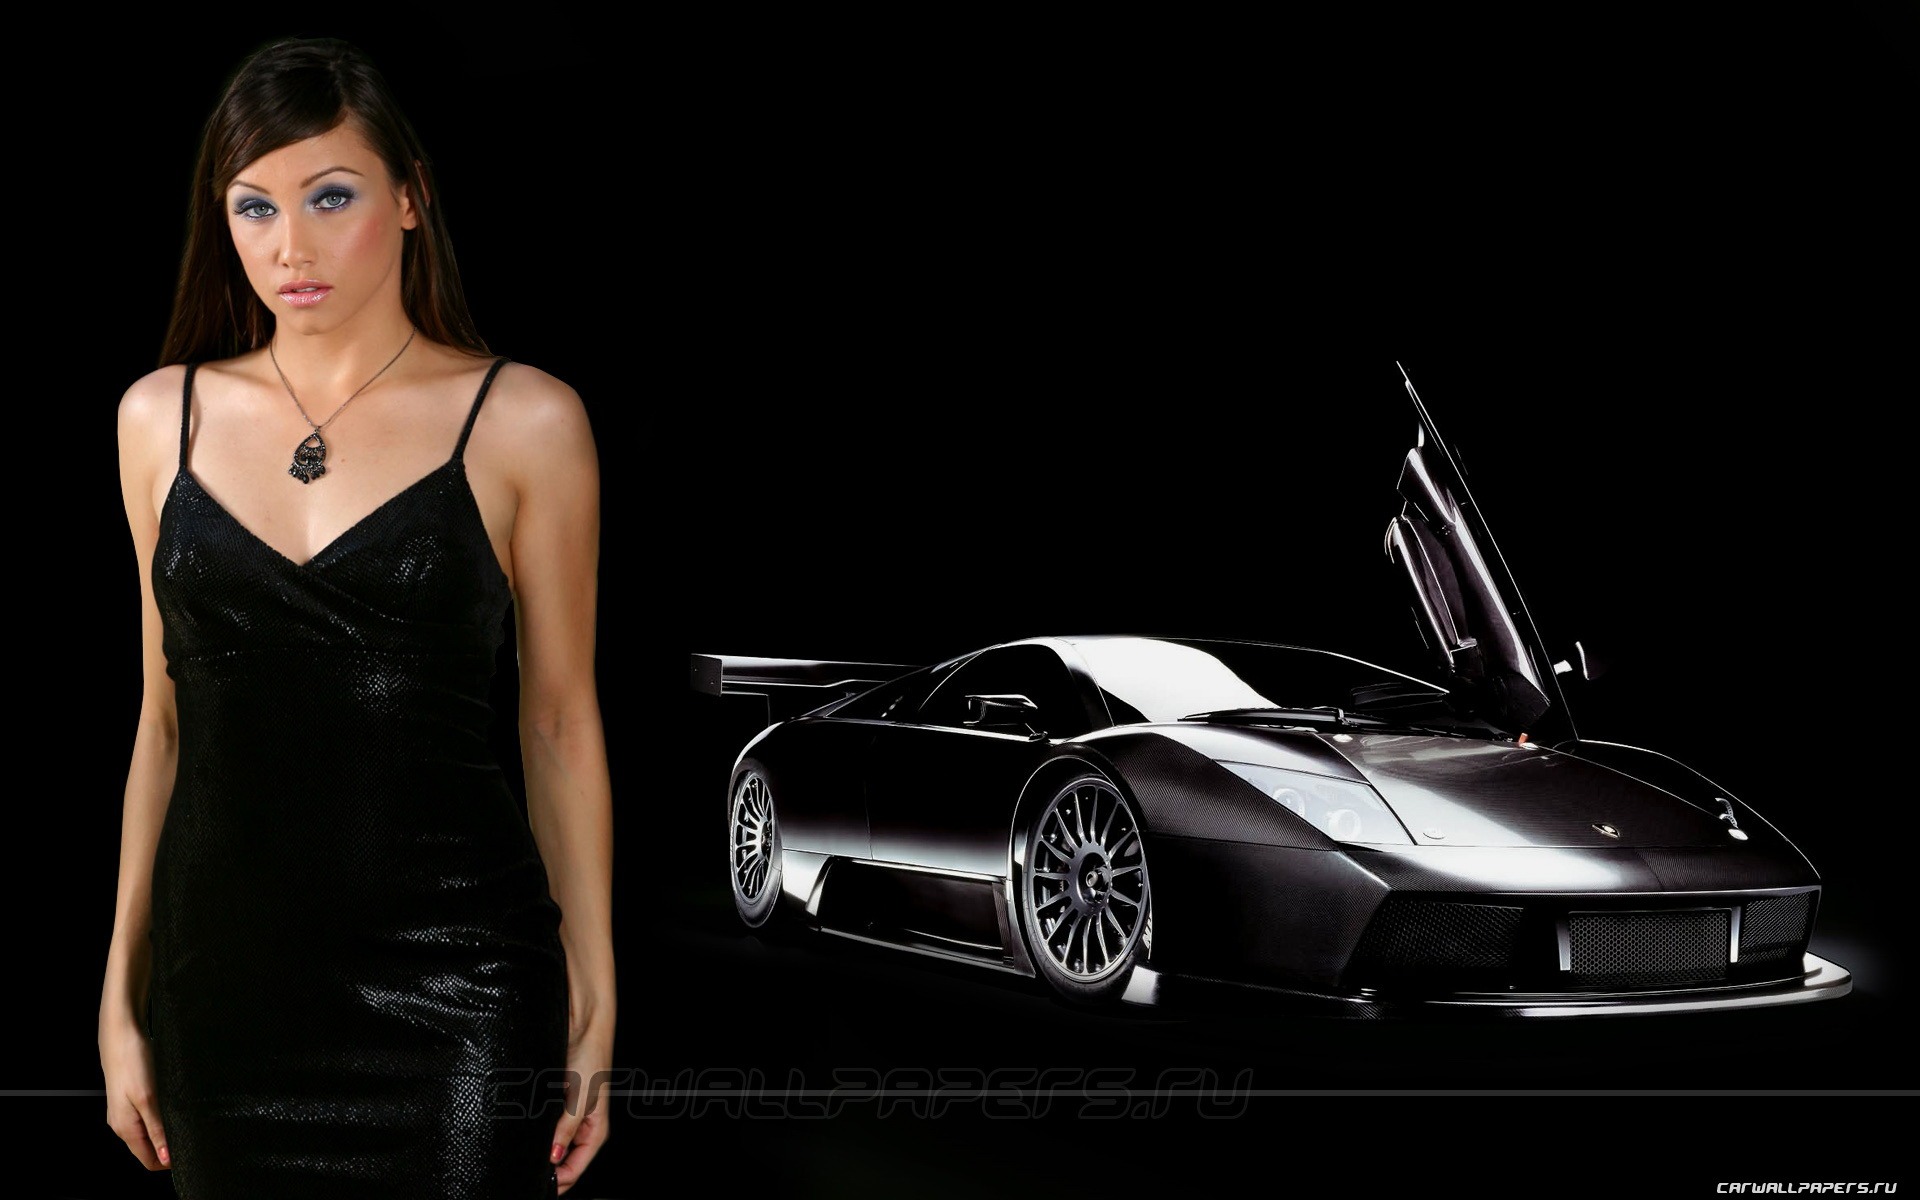 Cars and Girls wallpapers (2) #3 - 1920x1200